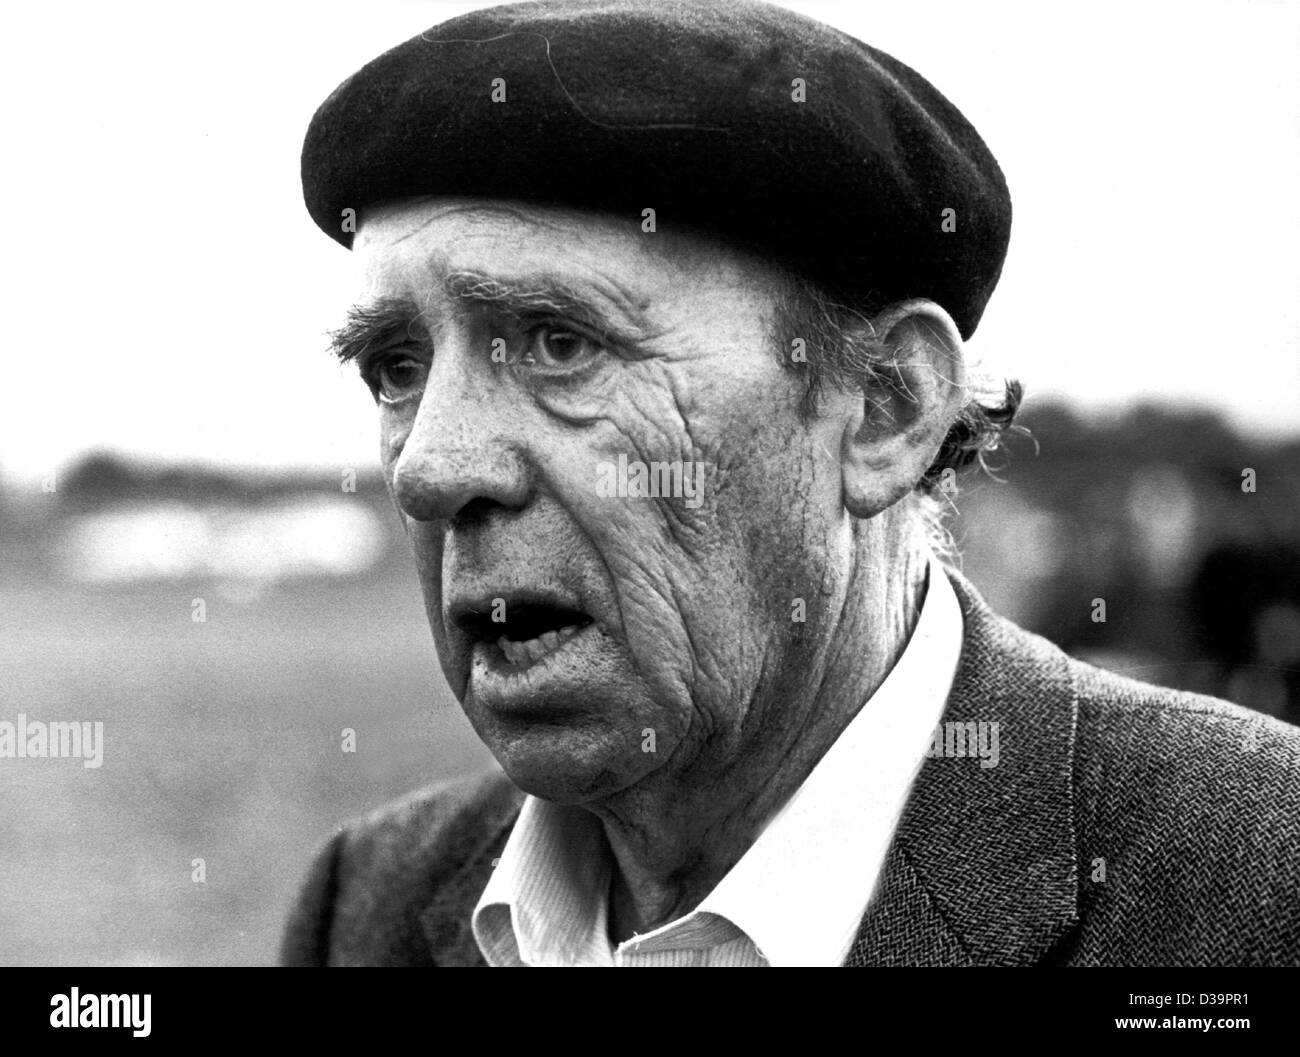 (dpa files) - German author Heinrich Boell pictured 29 September 1983. He was born 21 December 1917 in Cologne and died 16 July 1972 in Langenbroich. In 1962 he received the Buechner Award and in 1972 the Noble Prize for Literature. Some of his famous works: 'The Clown' (1963), 'Group Portrait With  Stock Photo